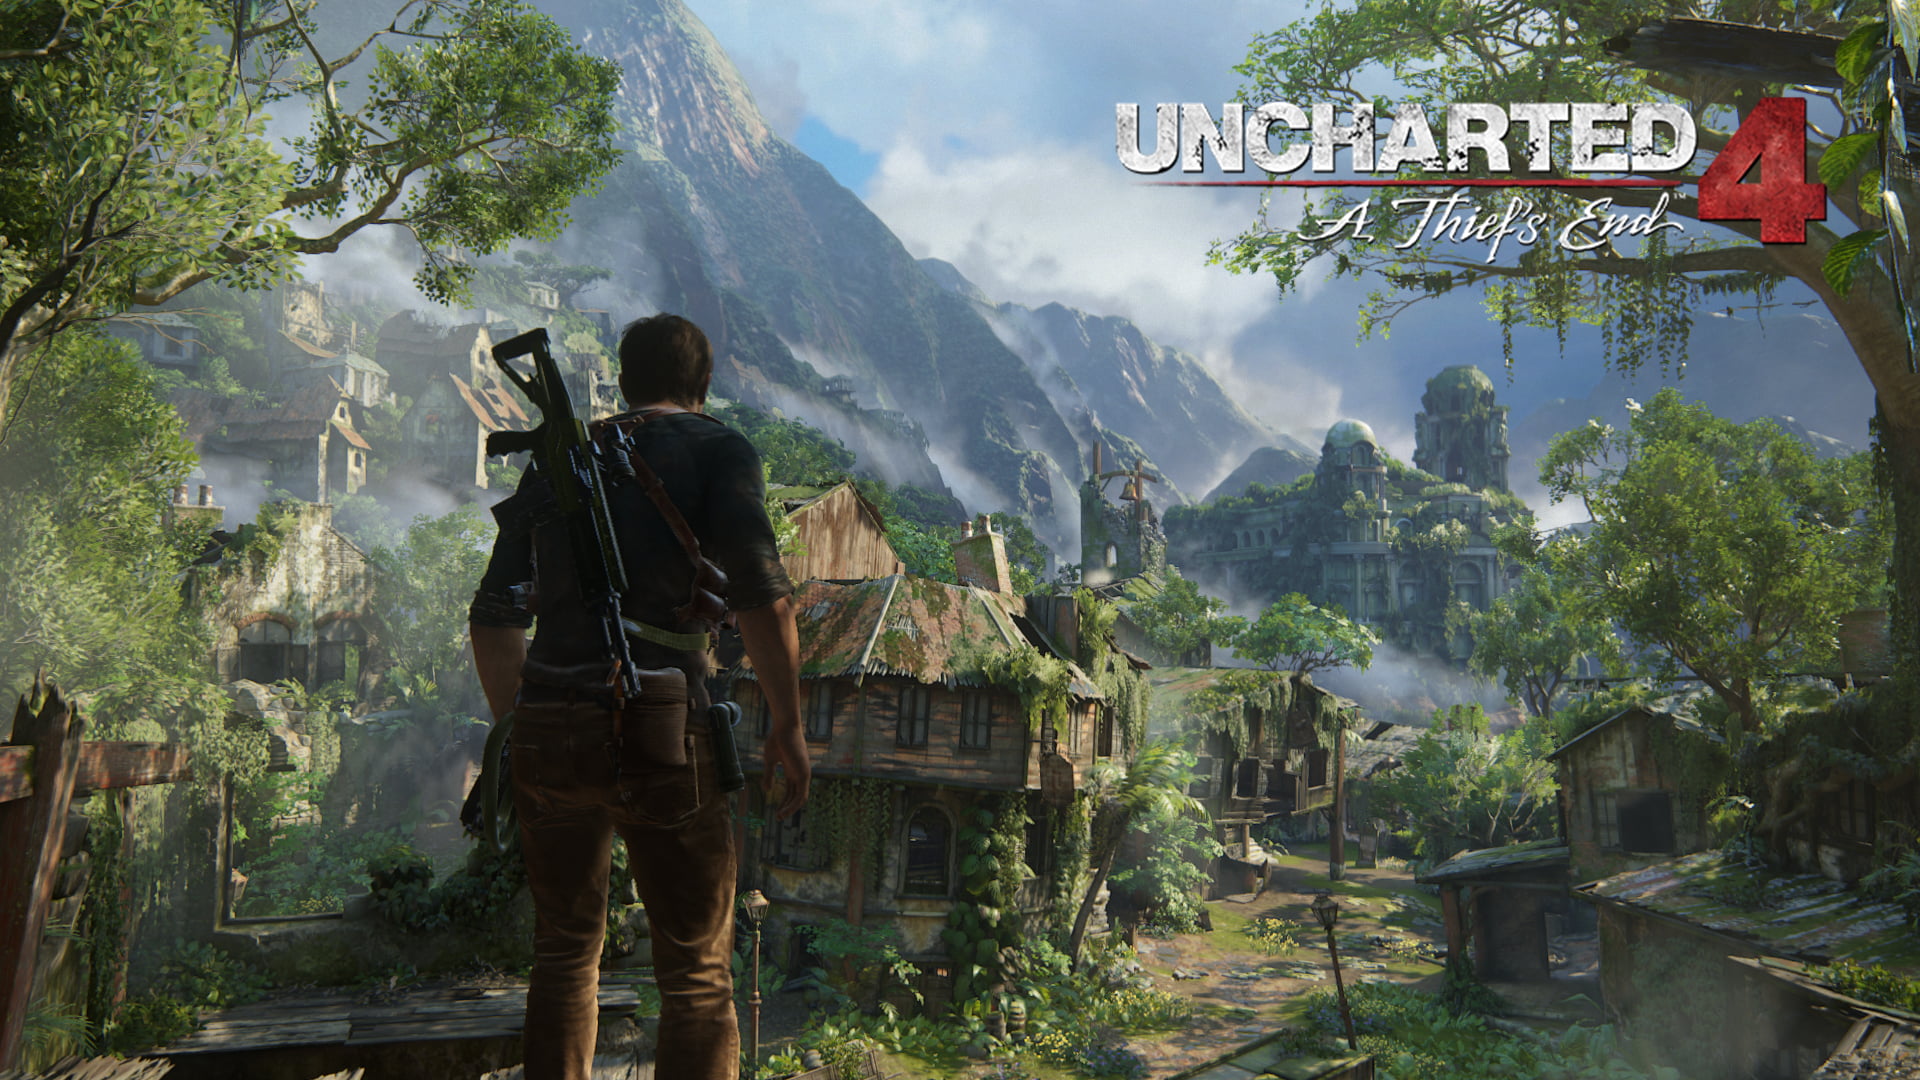 uncharted-4-a-thief-s-end-playstation-4-uncharted-digital-wallpaper.jpg